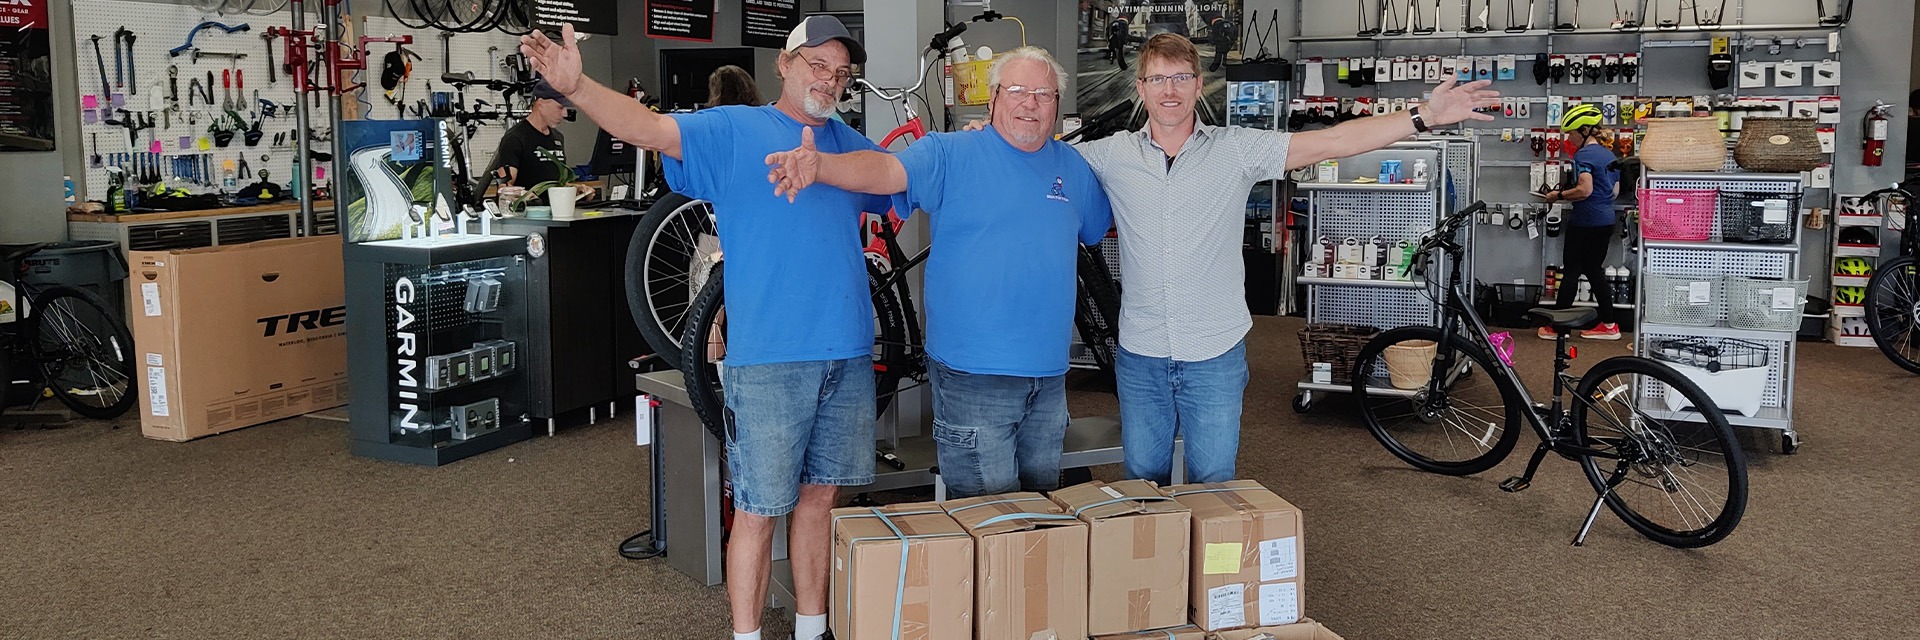 Mark Zirzow, Marketing Manager for Trek Bicycle Stores of Florida (Right) meets with Skip Riffle from Bikes for Tykes (Center) and John, a bicycle technician, (Left) to deliver the tube donation at our South Naples location.